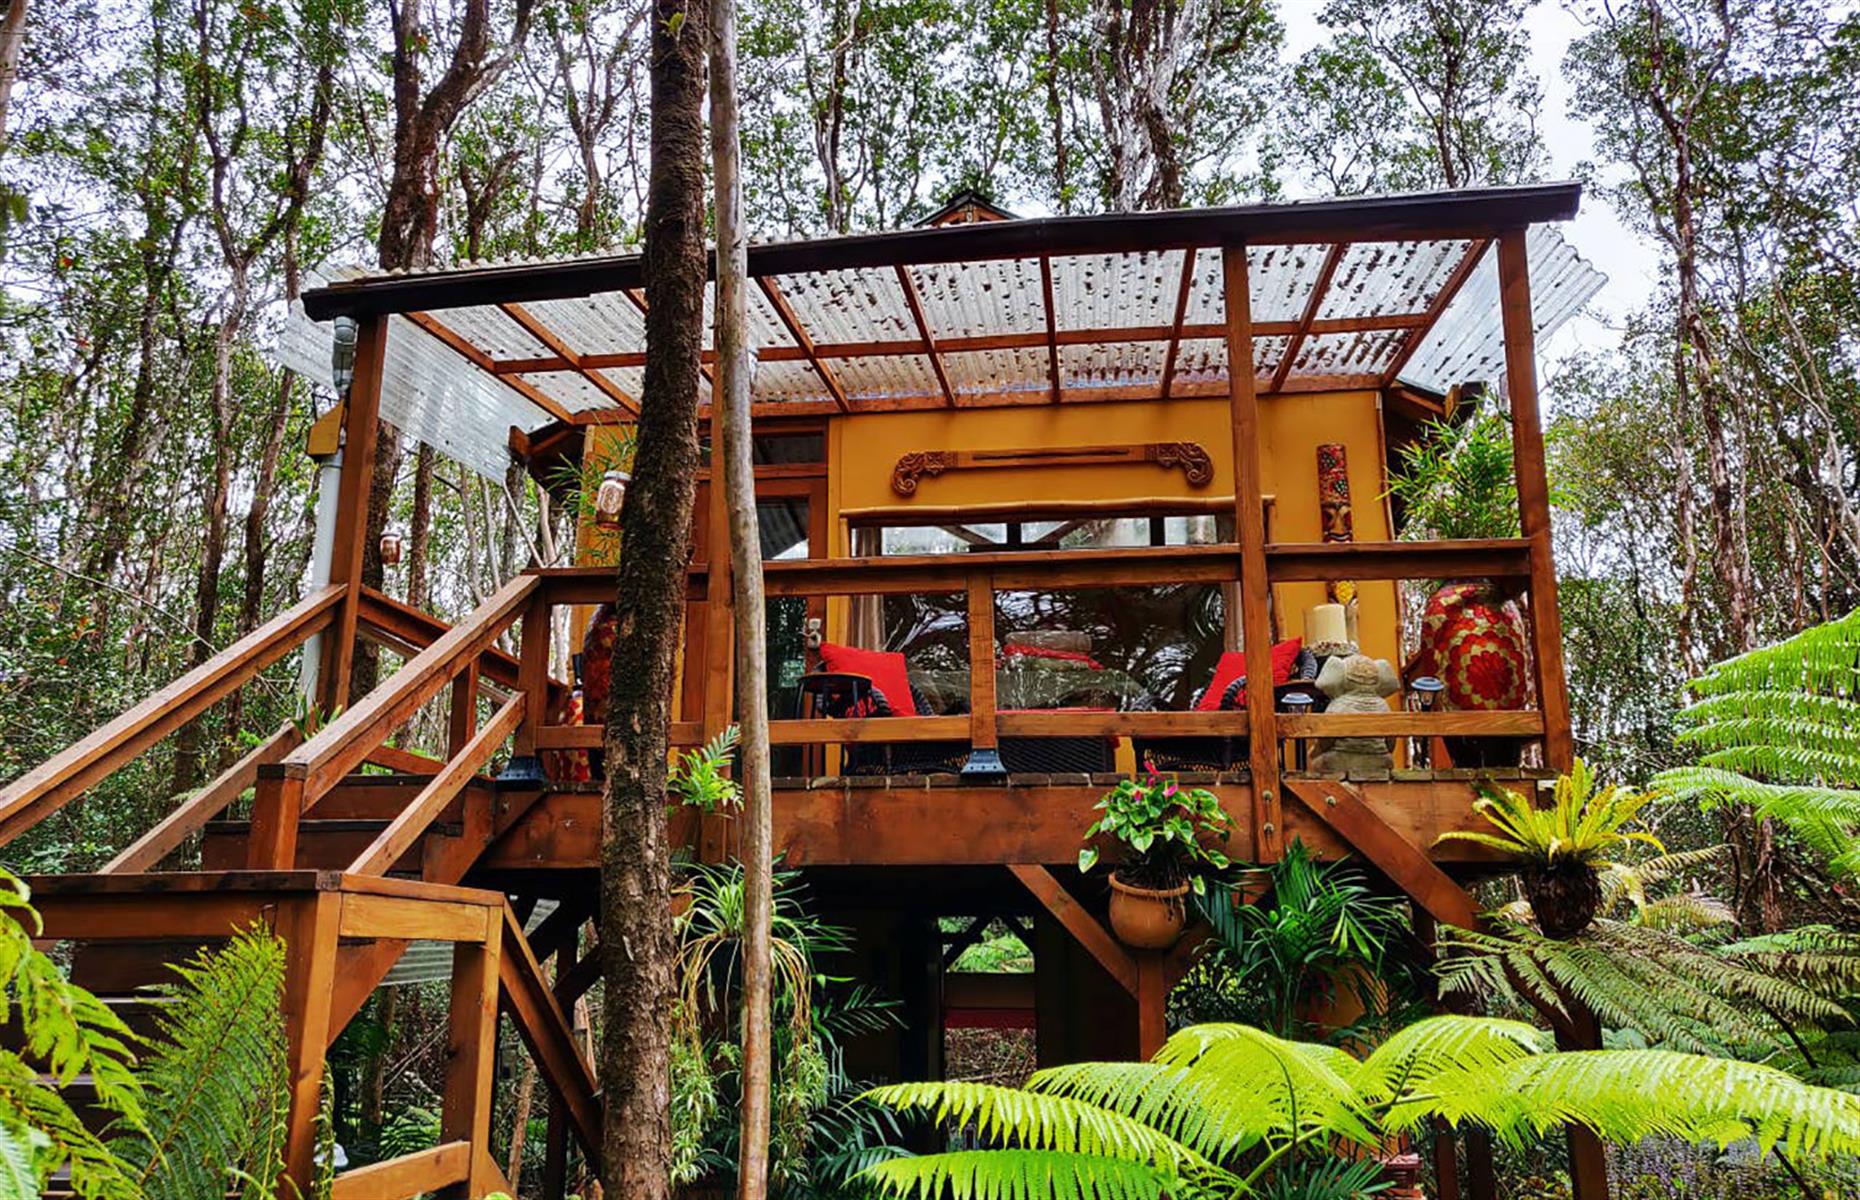 <p>A totally wild getaway hidden in a tropical rainforest, <a href="https://www.airbnb.co.uk/rooms/20151984">this one-bedroom treehouse</a> can be booked from just $110 per night. A place to kick back or a base for the nearby natural wonders, the house is set in a peaceful off-grid spot. Great for couples or solo adventurers, it's eight miles (13km) from the <a href="https://www.nps.gov/havo/index.htm">Big Island's Hawai'i Volcanoes National Park</a> (note that some visitor services here are <a href="https://www.nps.gov/havo/planyourvisit/conditions.htm">currently unavailable</a>) and 21 miles (34km) from the Rainbow Falls.</p>